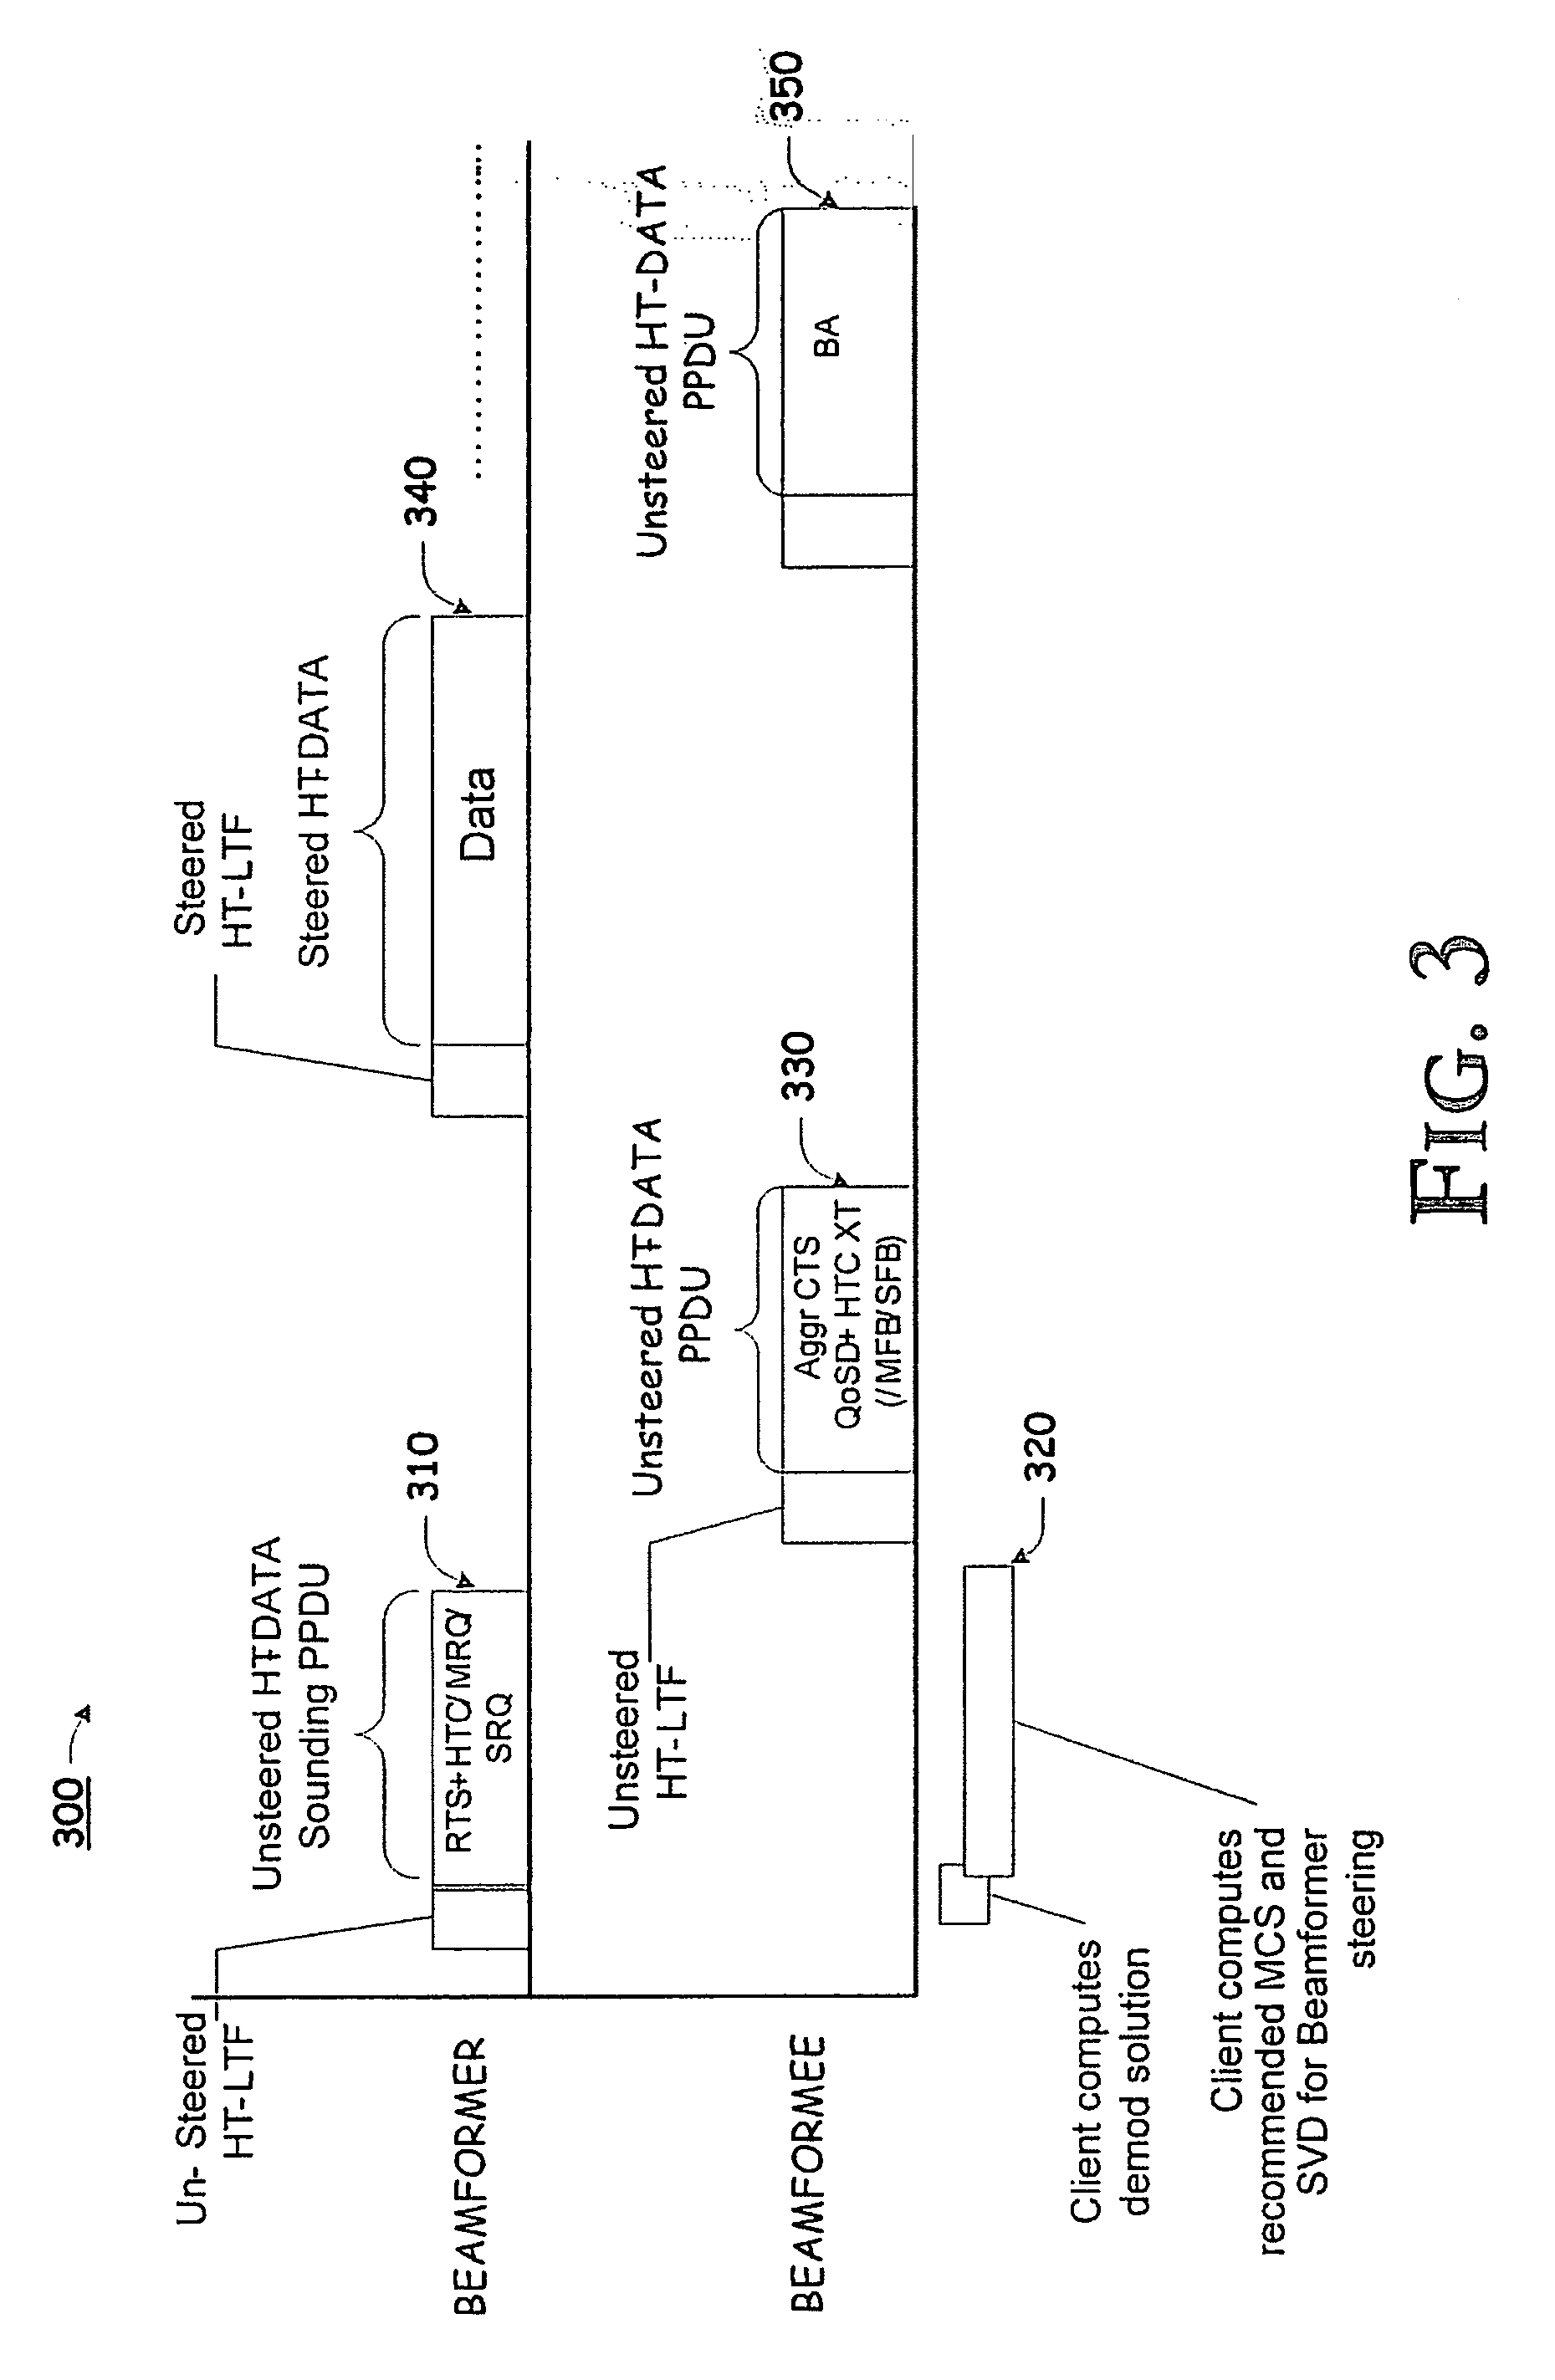 Wireless communication system, associated methods and data structures